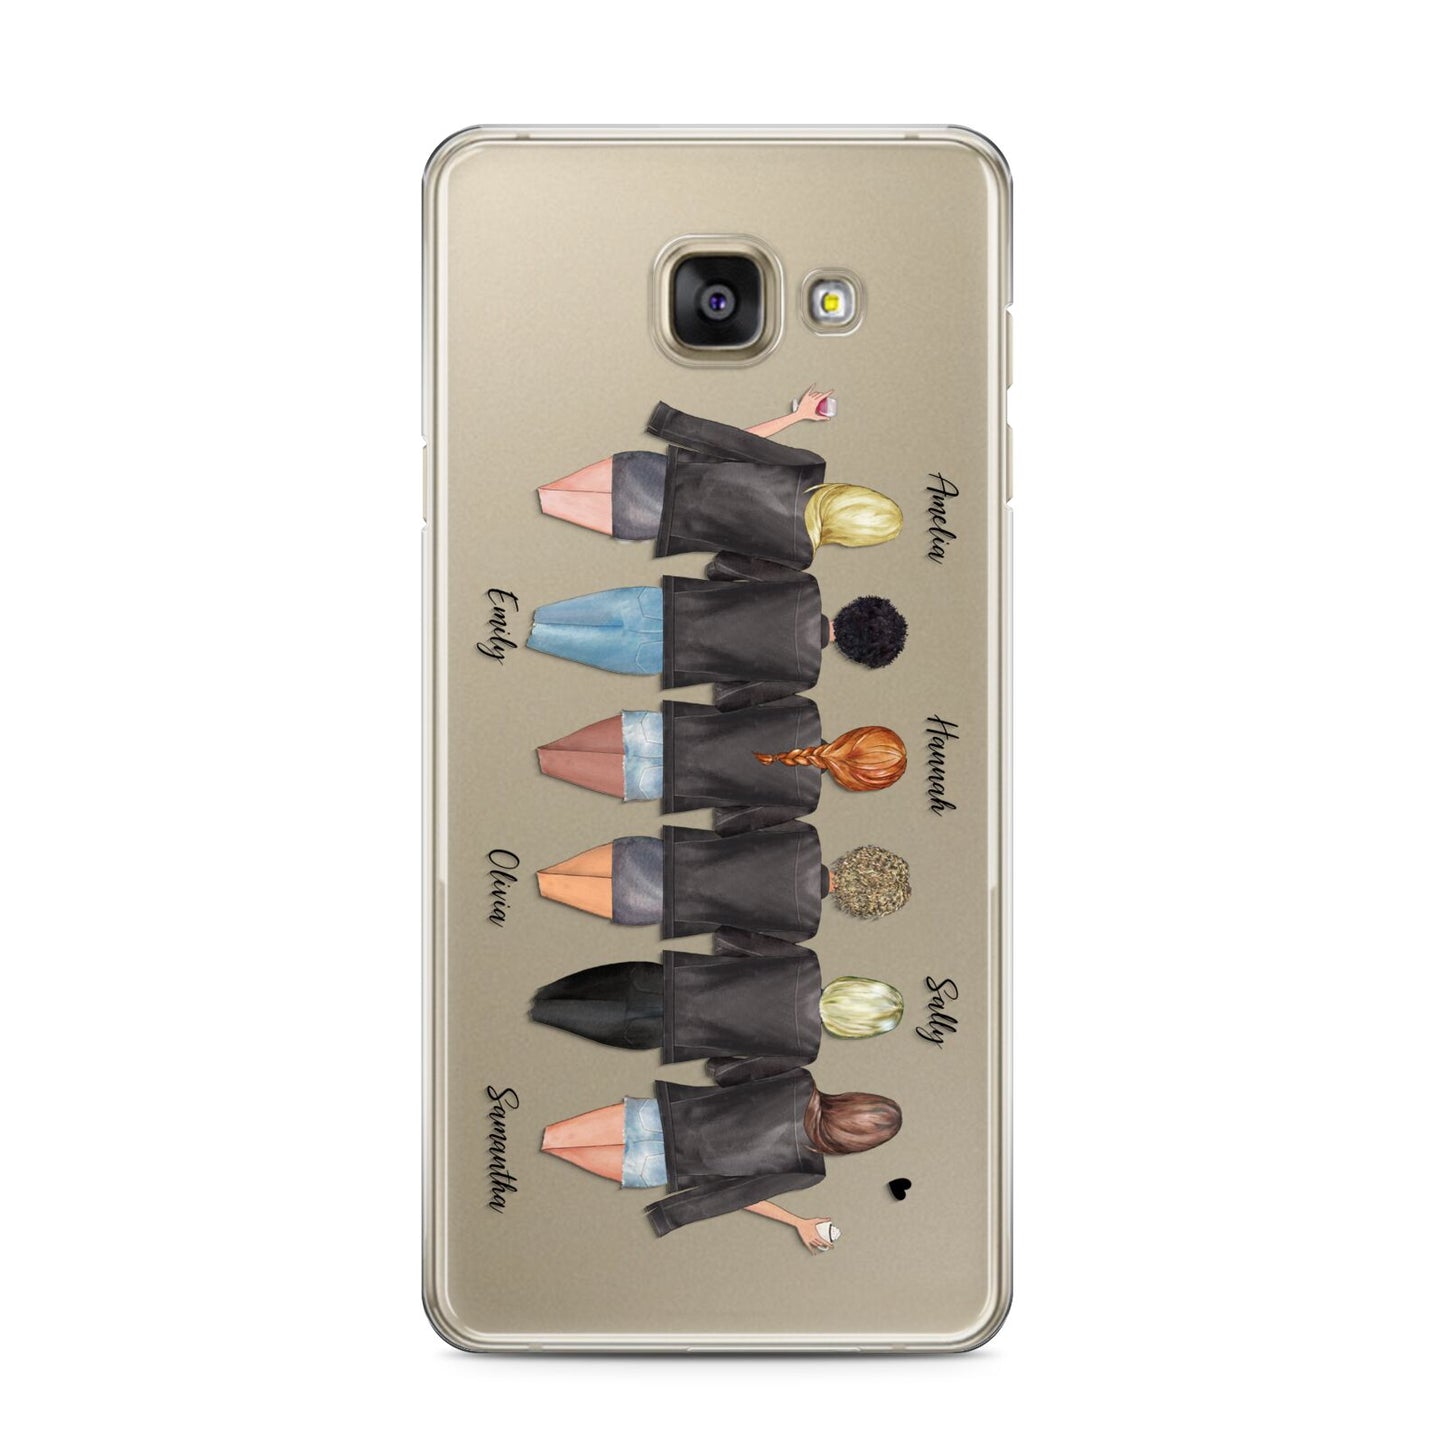 6 Best Friends with Names Samsung Galaxy A3 2016 Case on gold phone